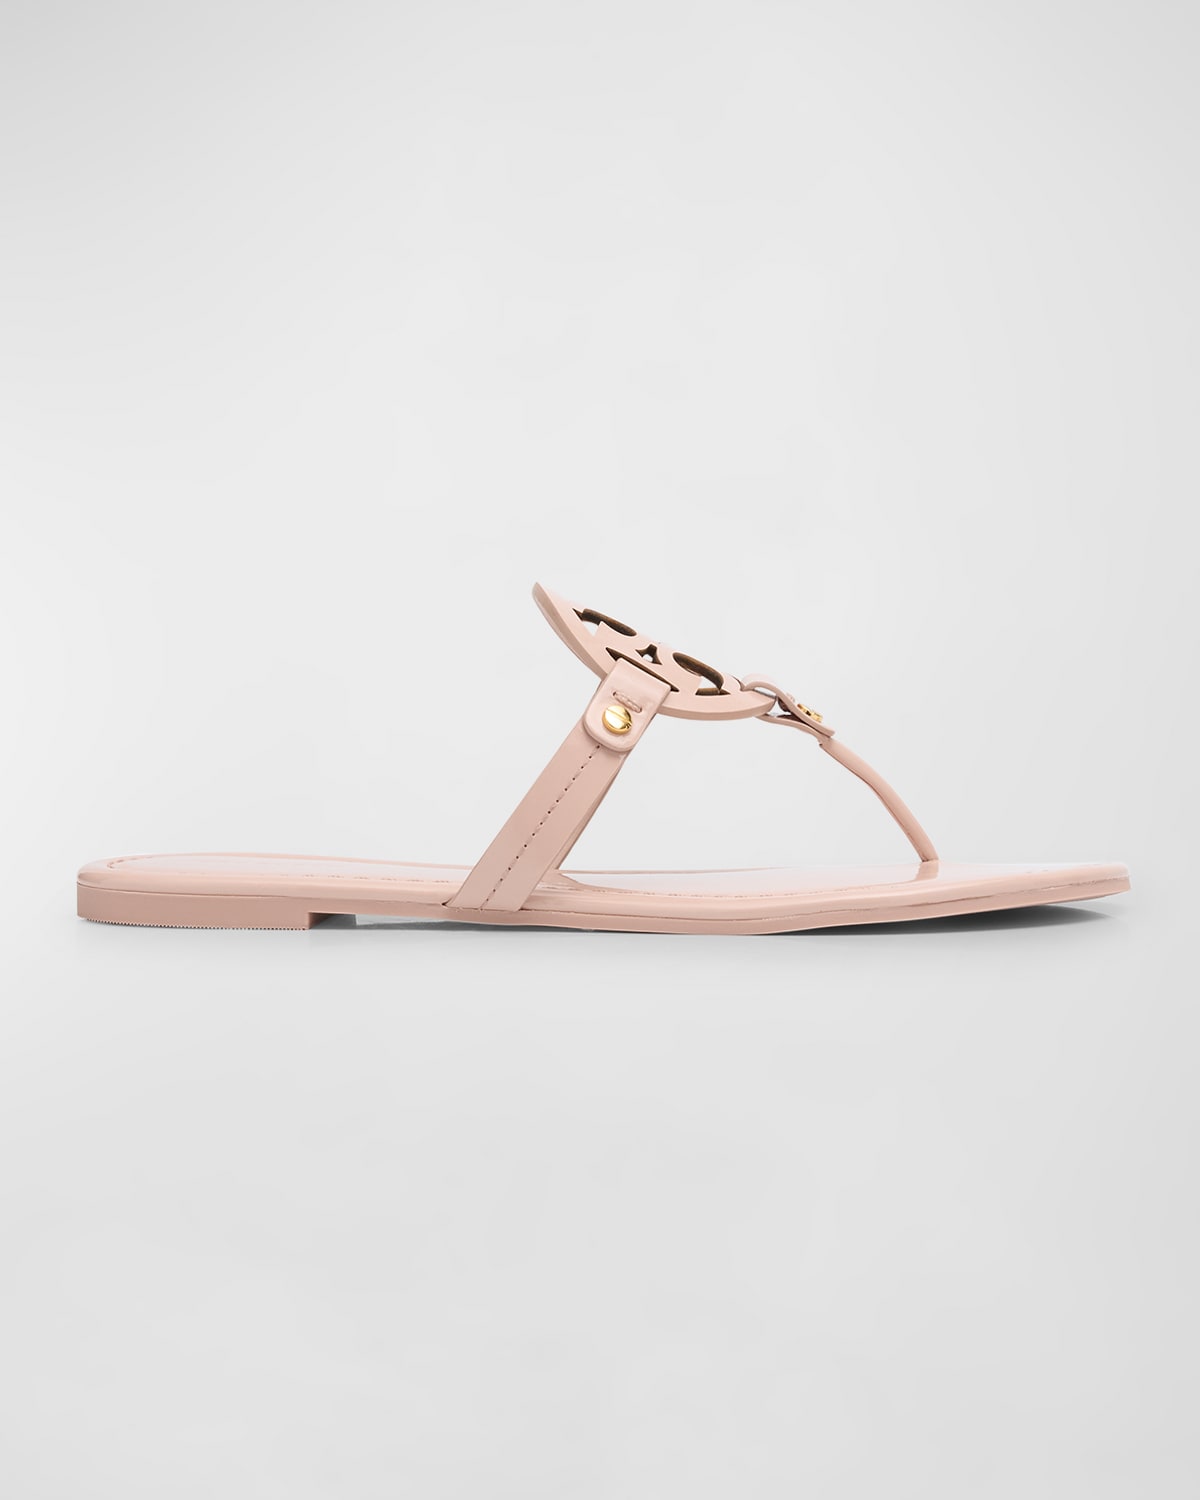 Tory Burch Miller Leather Sandals | Neiman Marcus